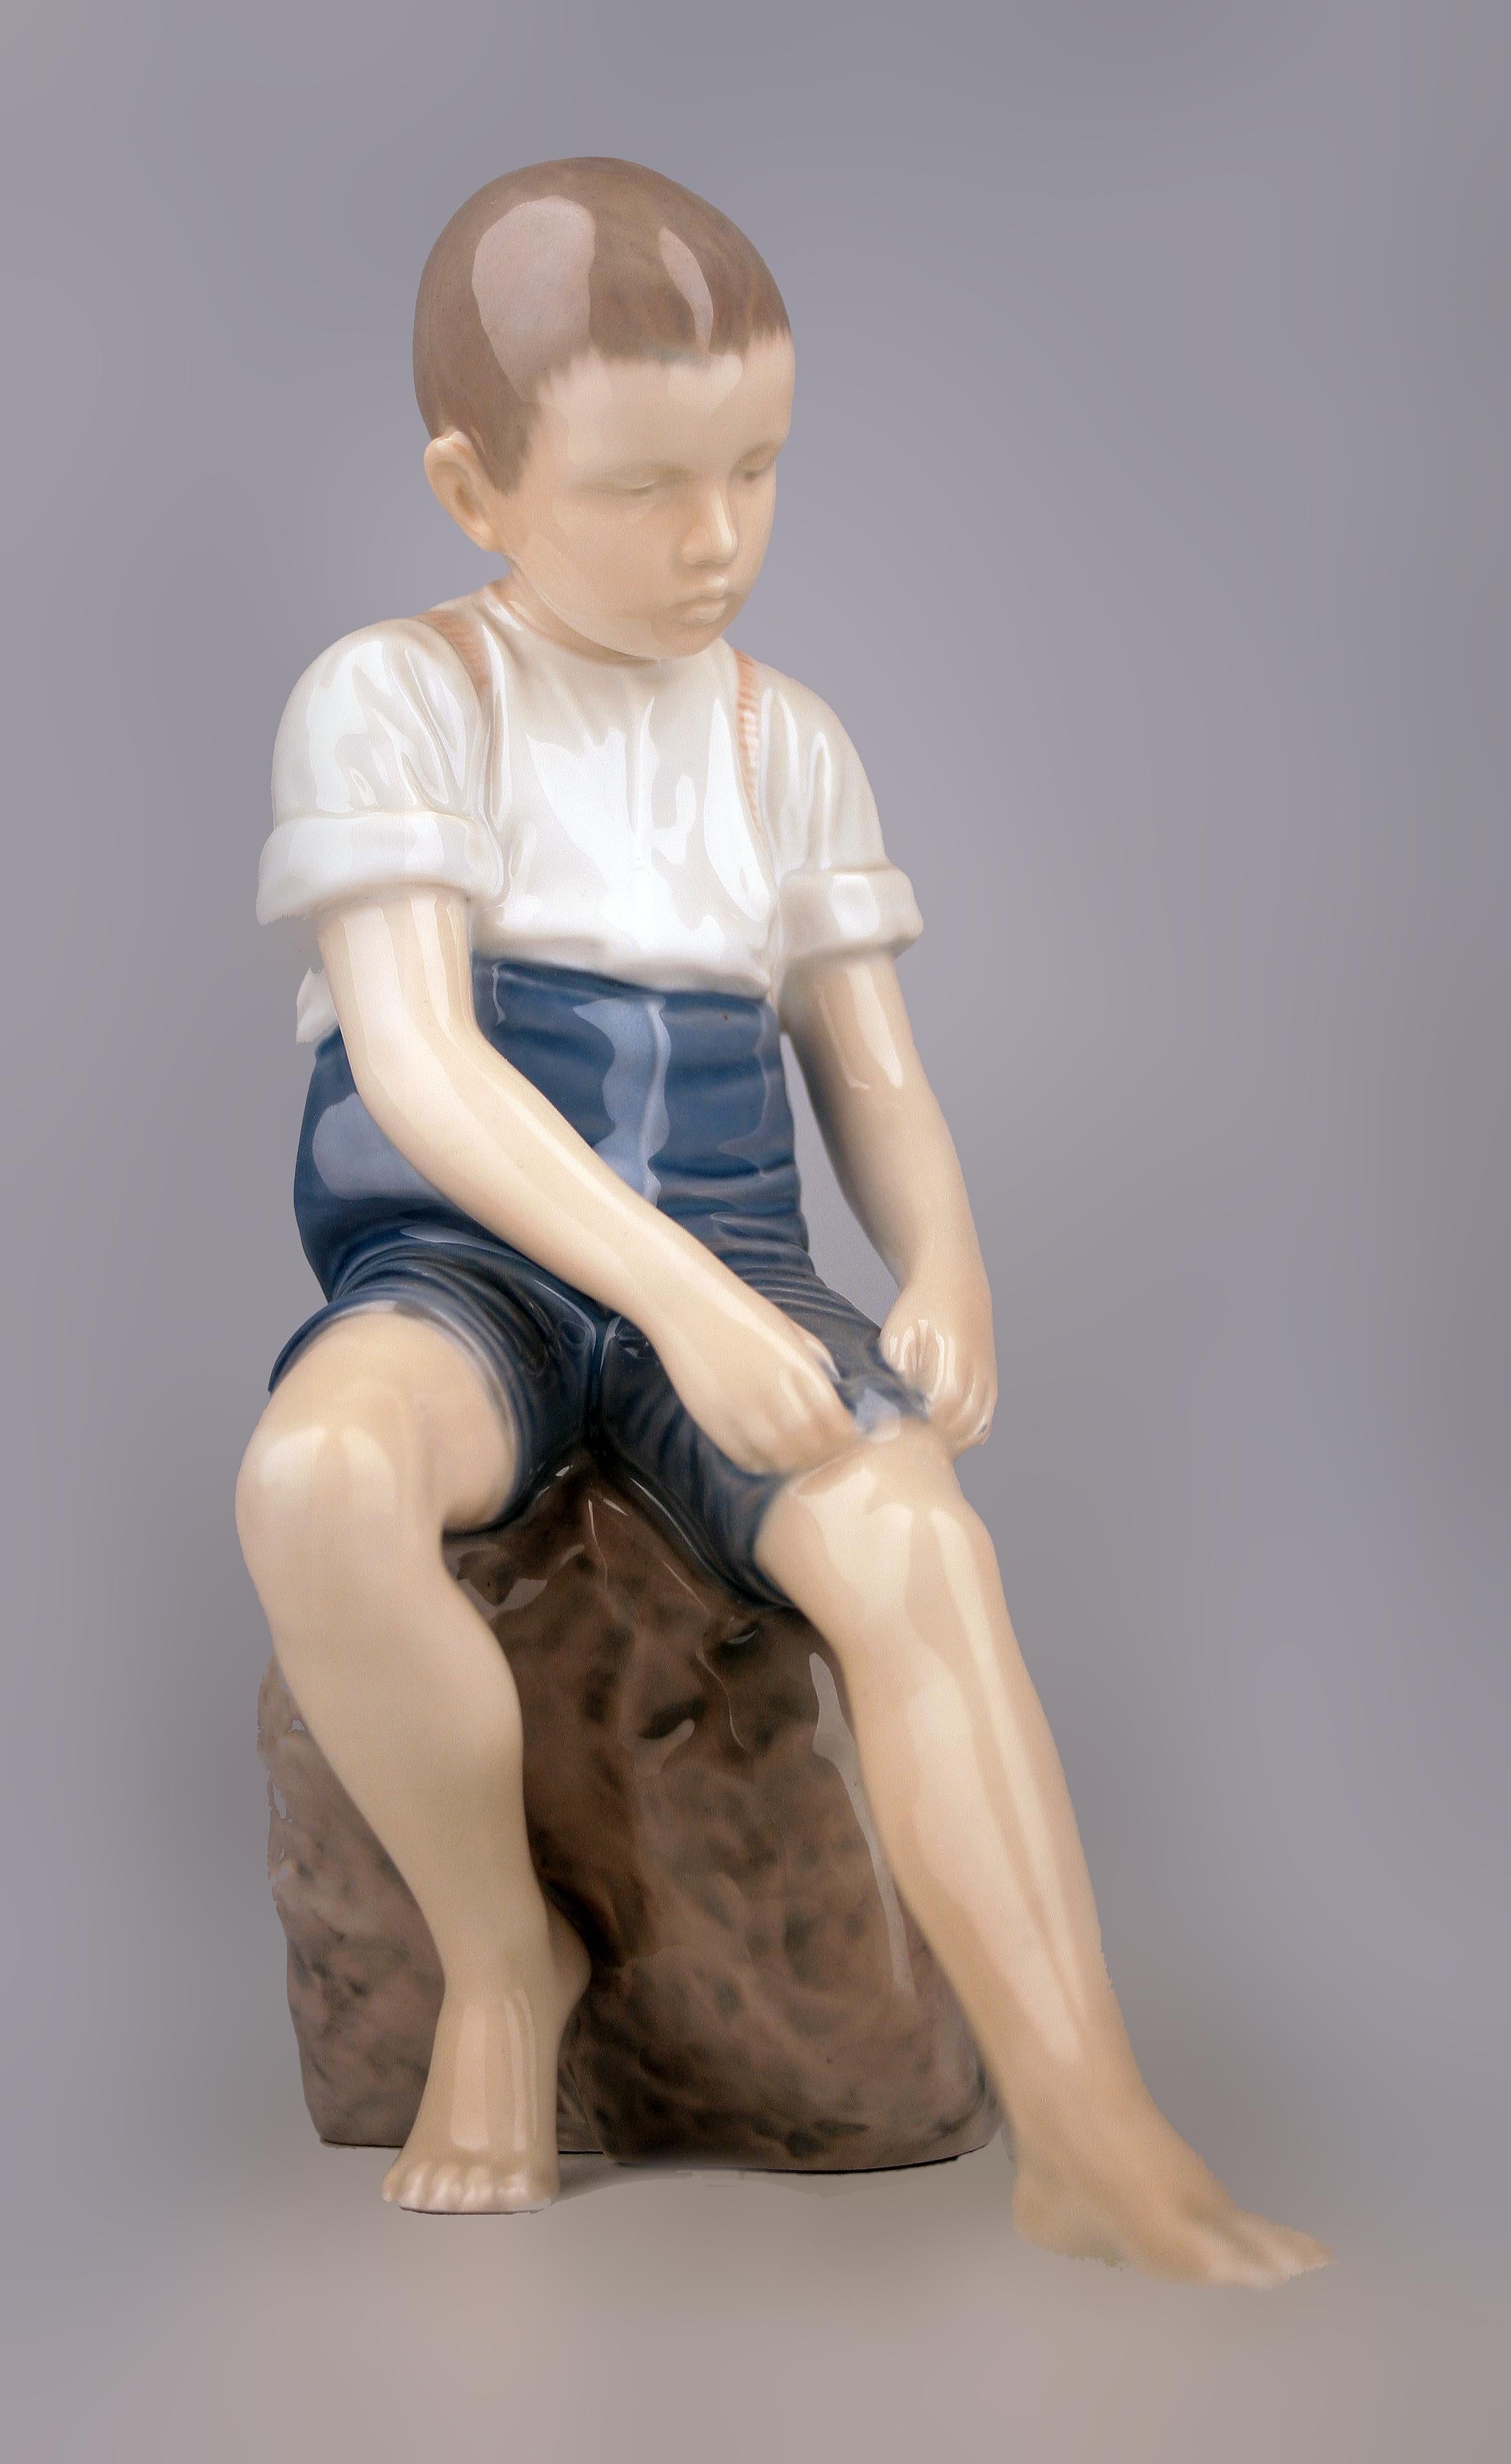 Mid-20th Century Modern Danish Porcelain Sculpture of Boy by Bing & Grøndahl In Good Condition For Sale In North Miami, FL